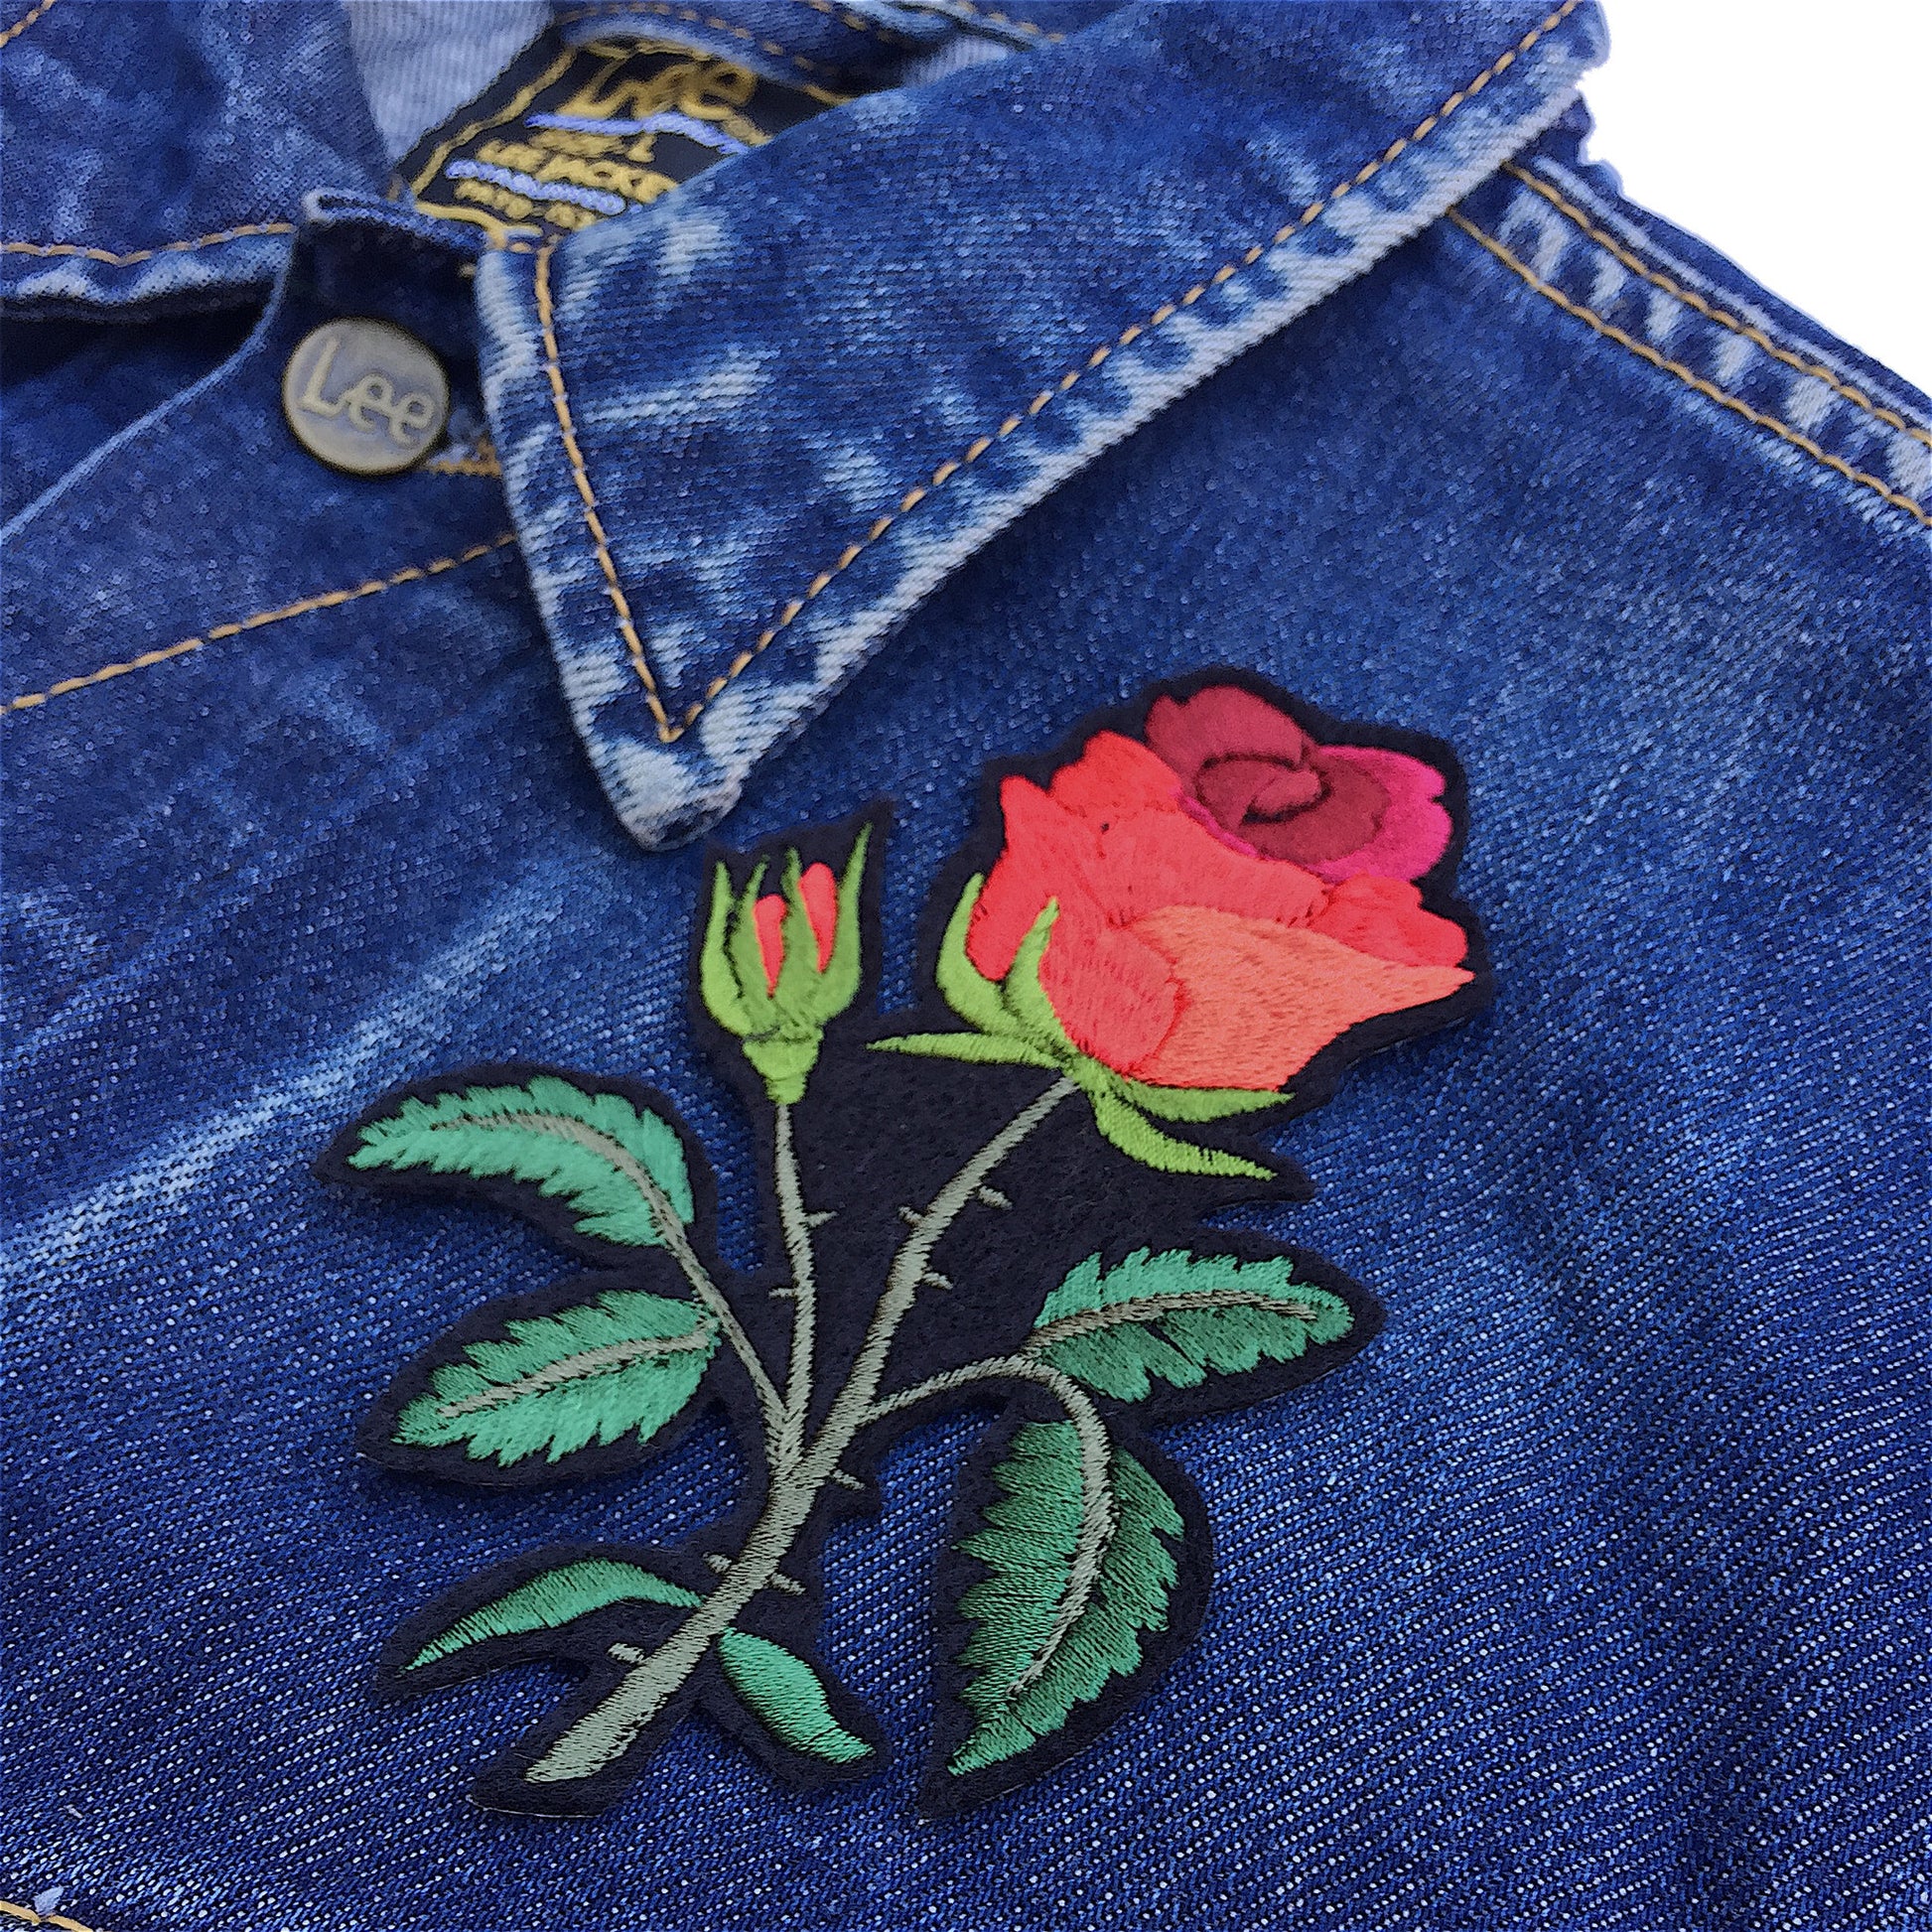 Red rose embroidered patch shown on front of a denim jacket